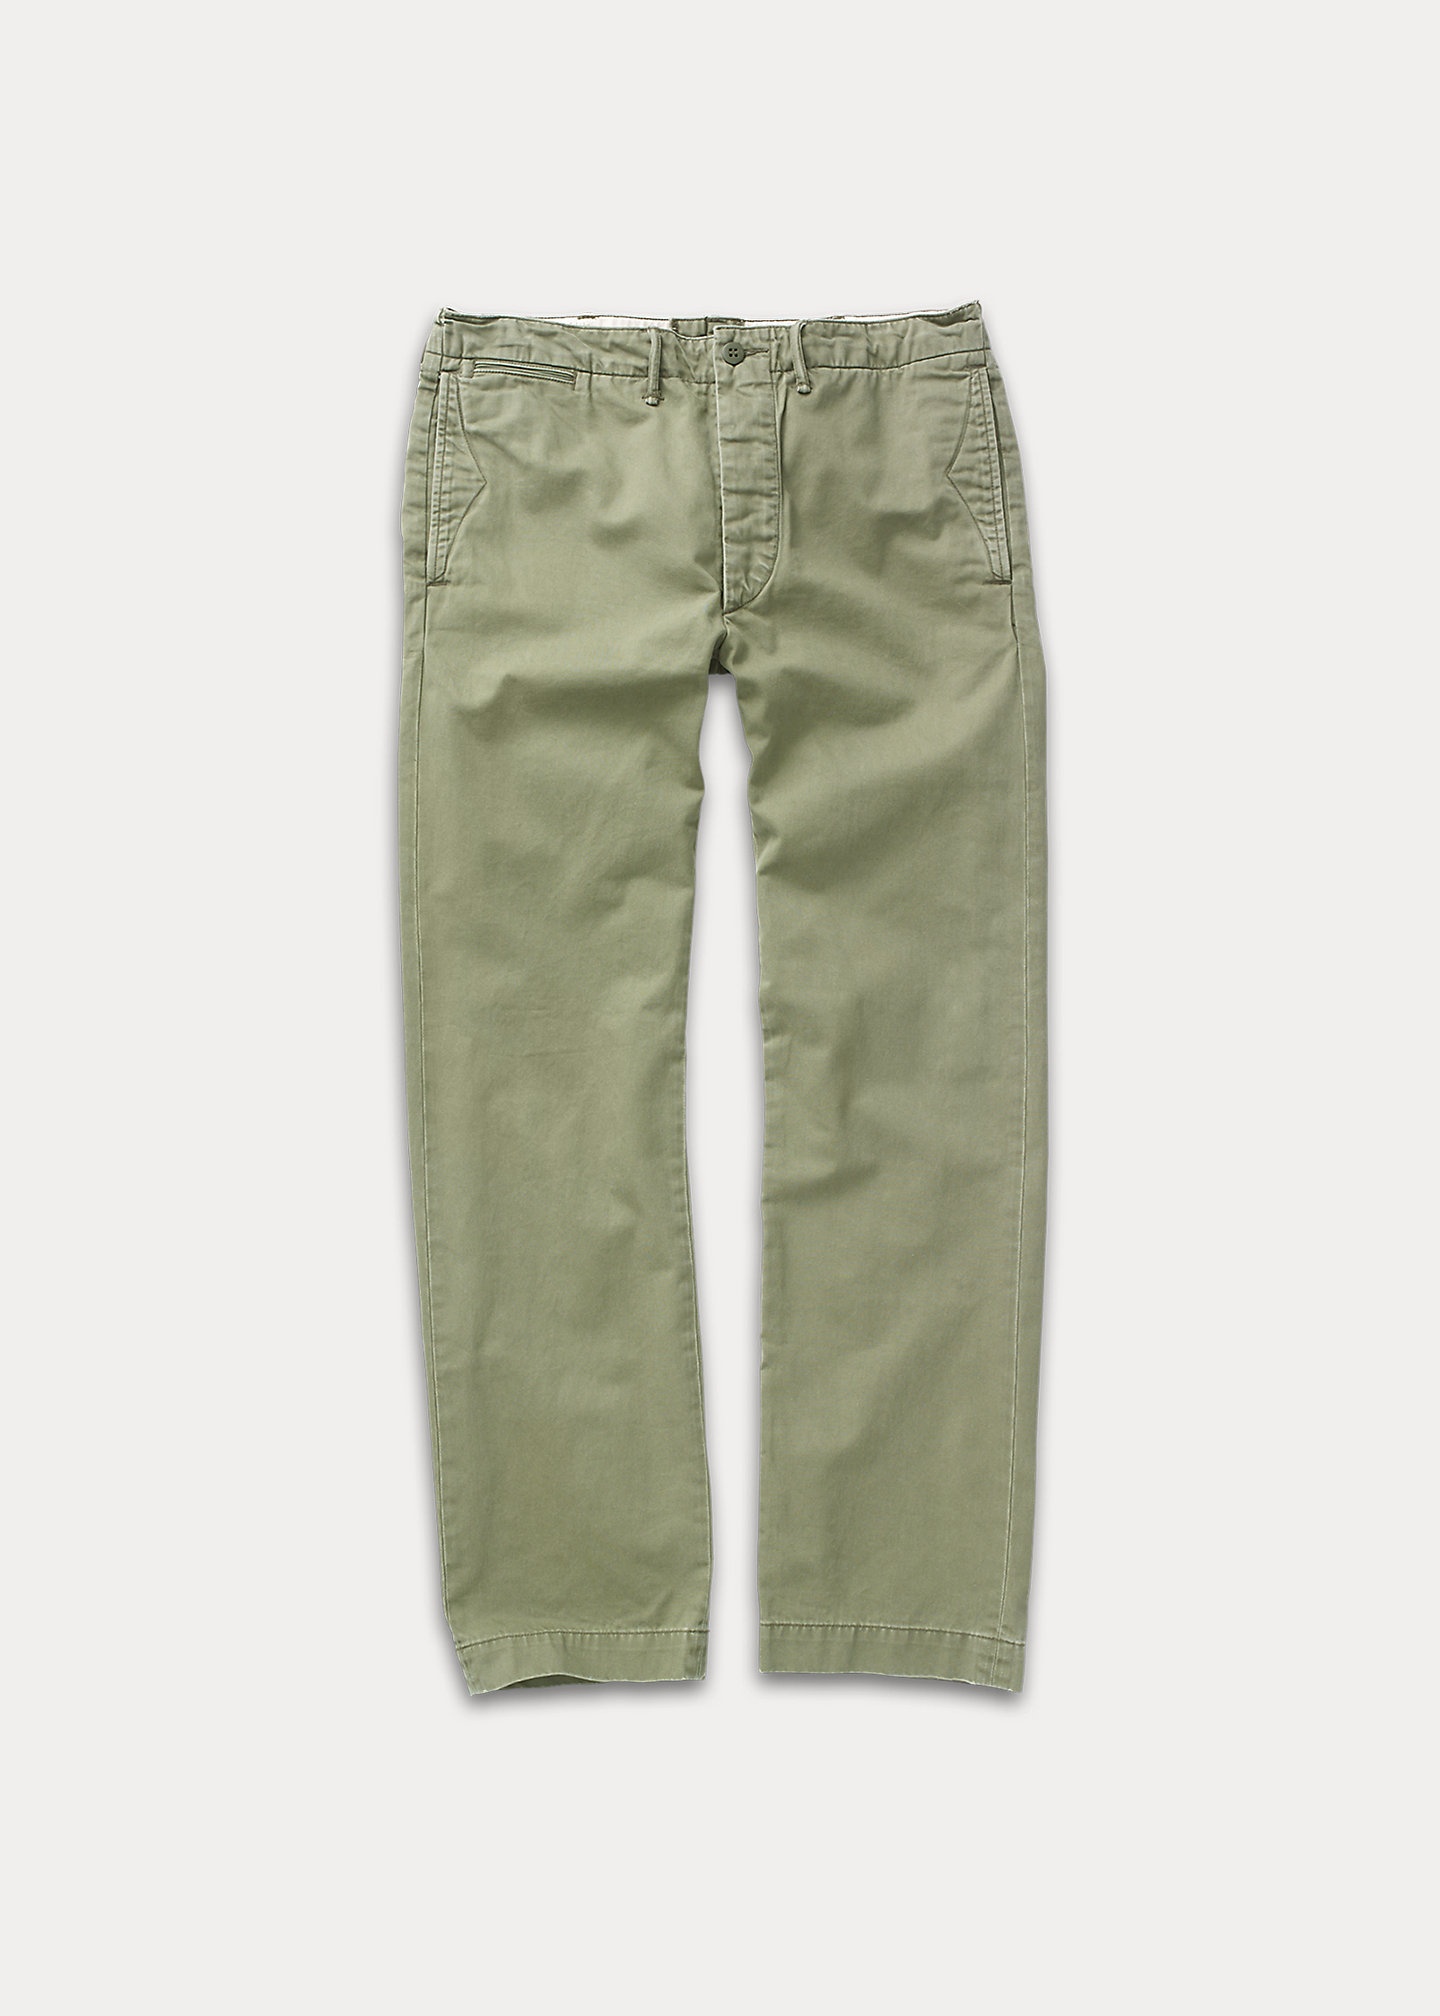 Officer’s Chino Pant - 1